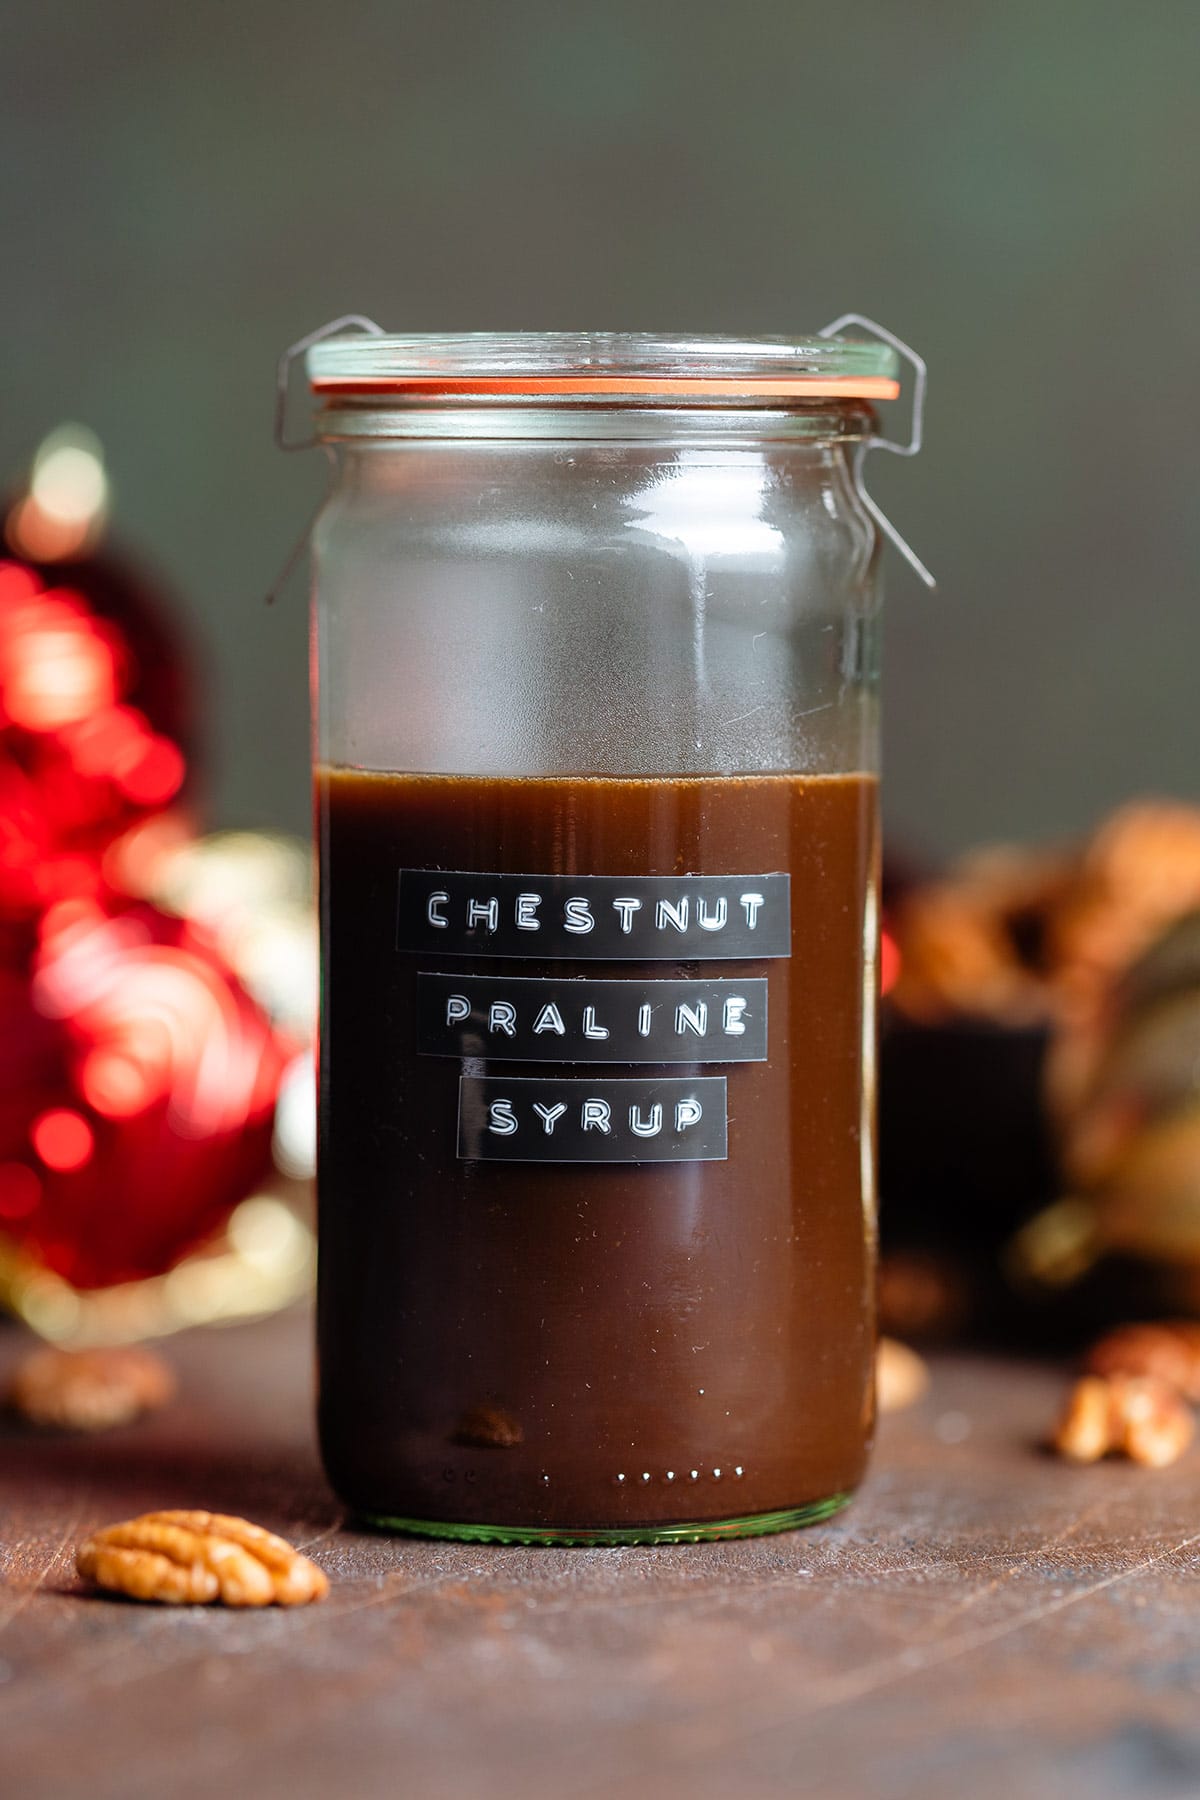 Dark brown chestnut praline syrup in a glass jar with a glass lid and Christmas ornaments in the background.